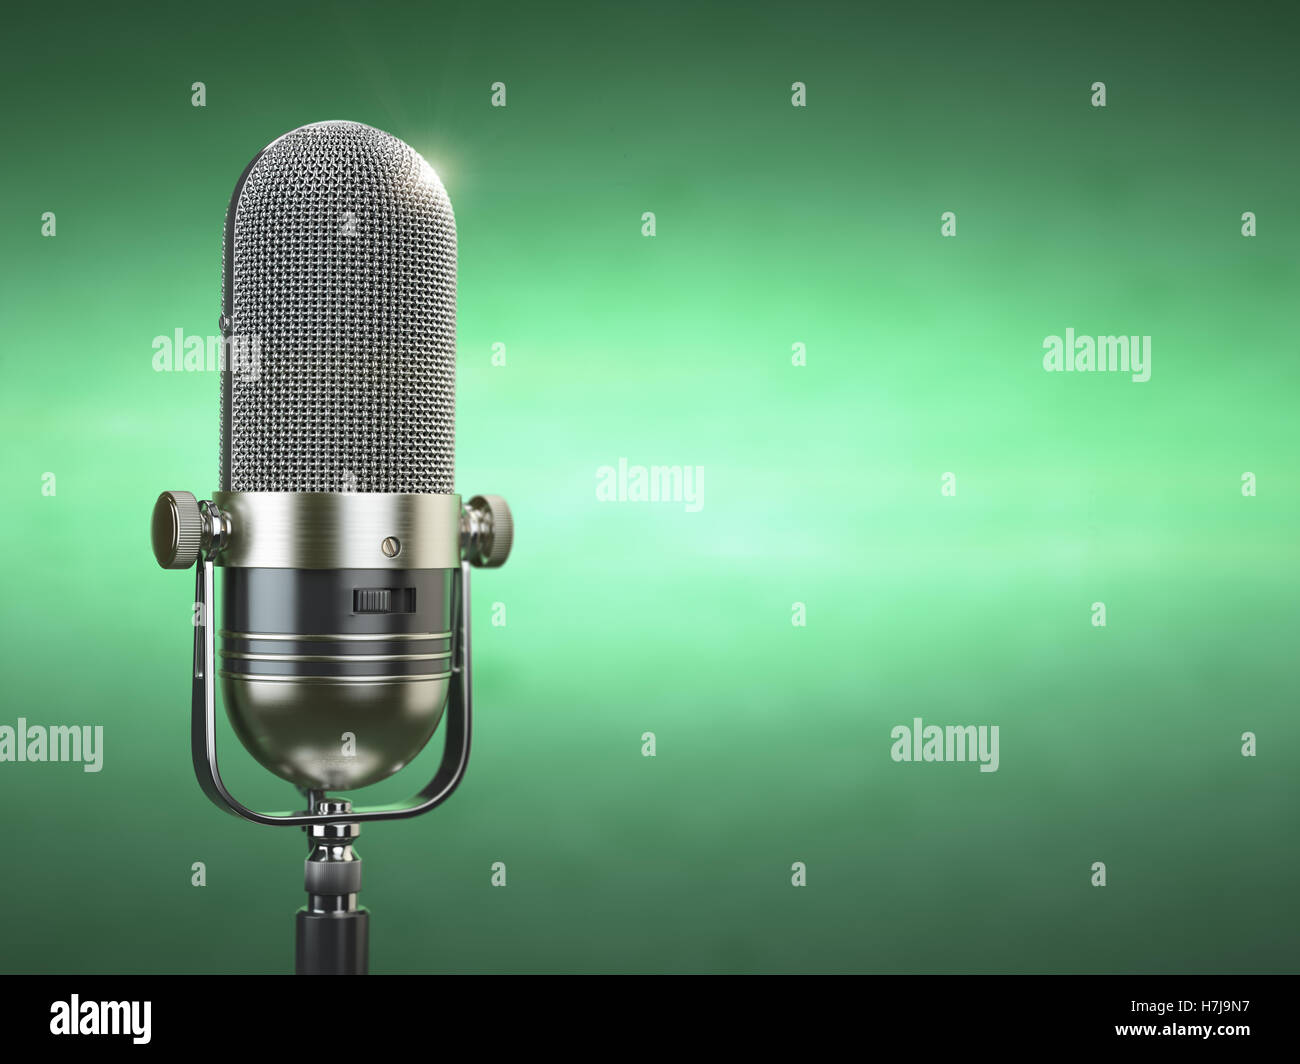 Retro old microphone. Radio show or audio podcast concept. Vintage microphone on green background. 3d illustration Stock Photo